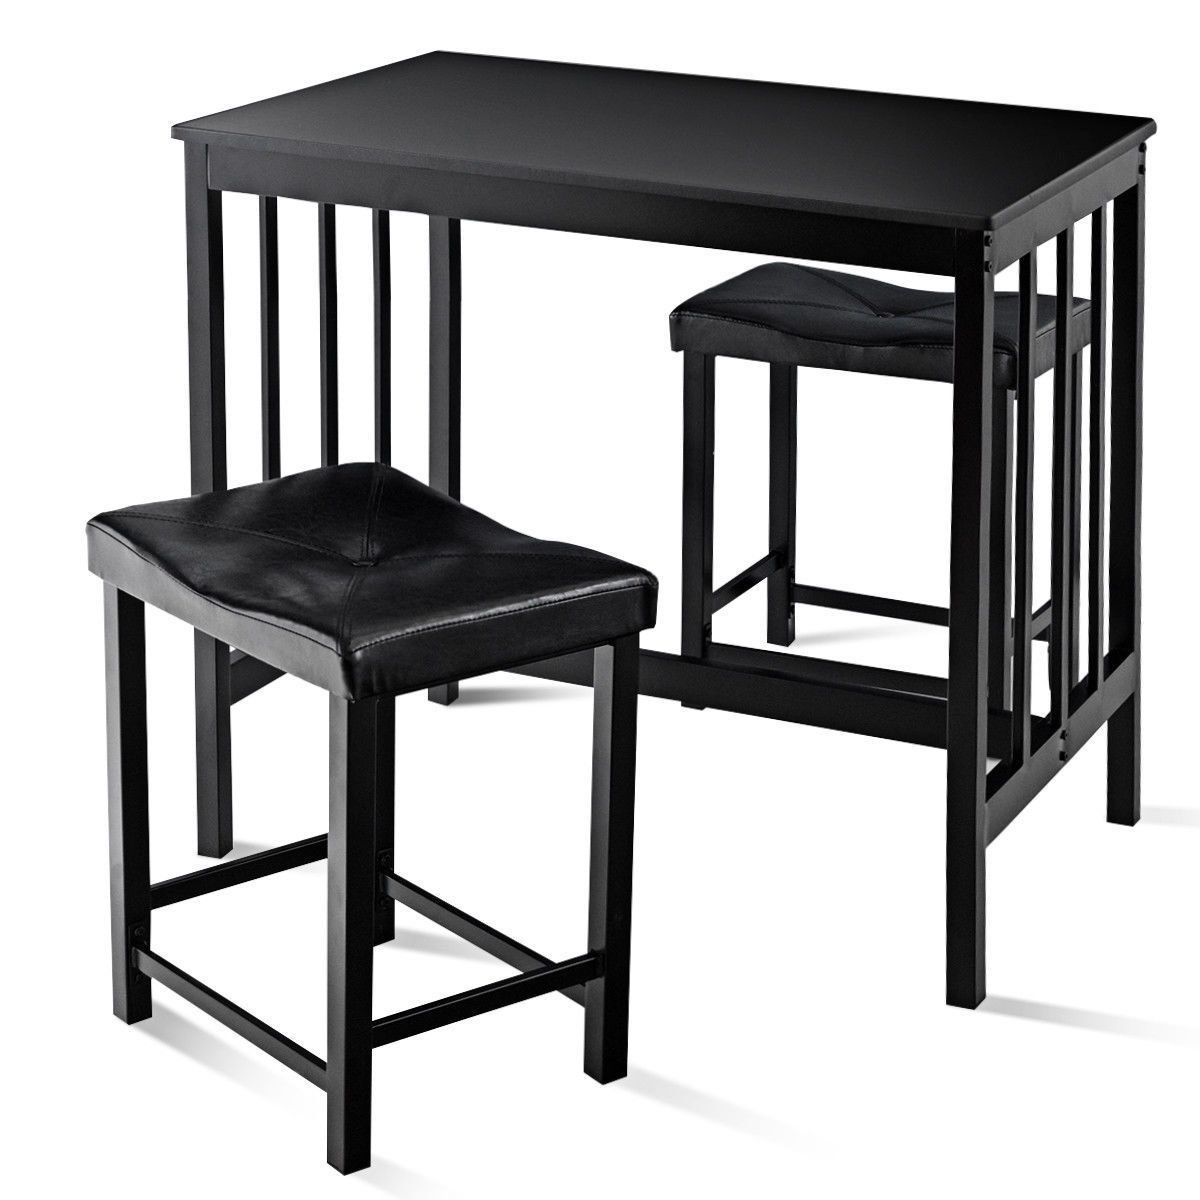 Popular Miskell 3 Piece Dining Sets Intended For Miskell 3 Piece Dining Set (View 1 of 20)